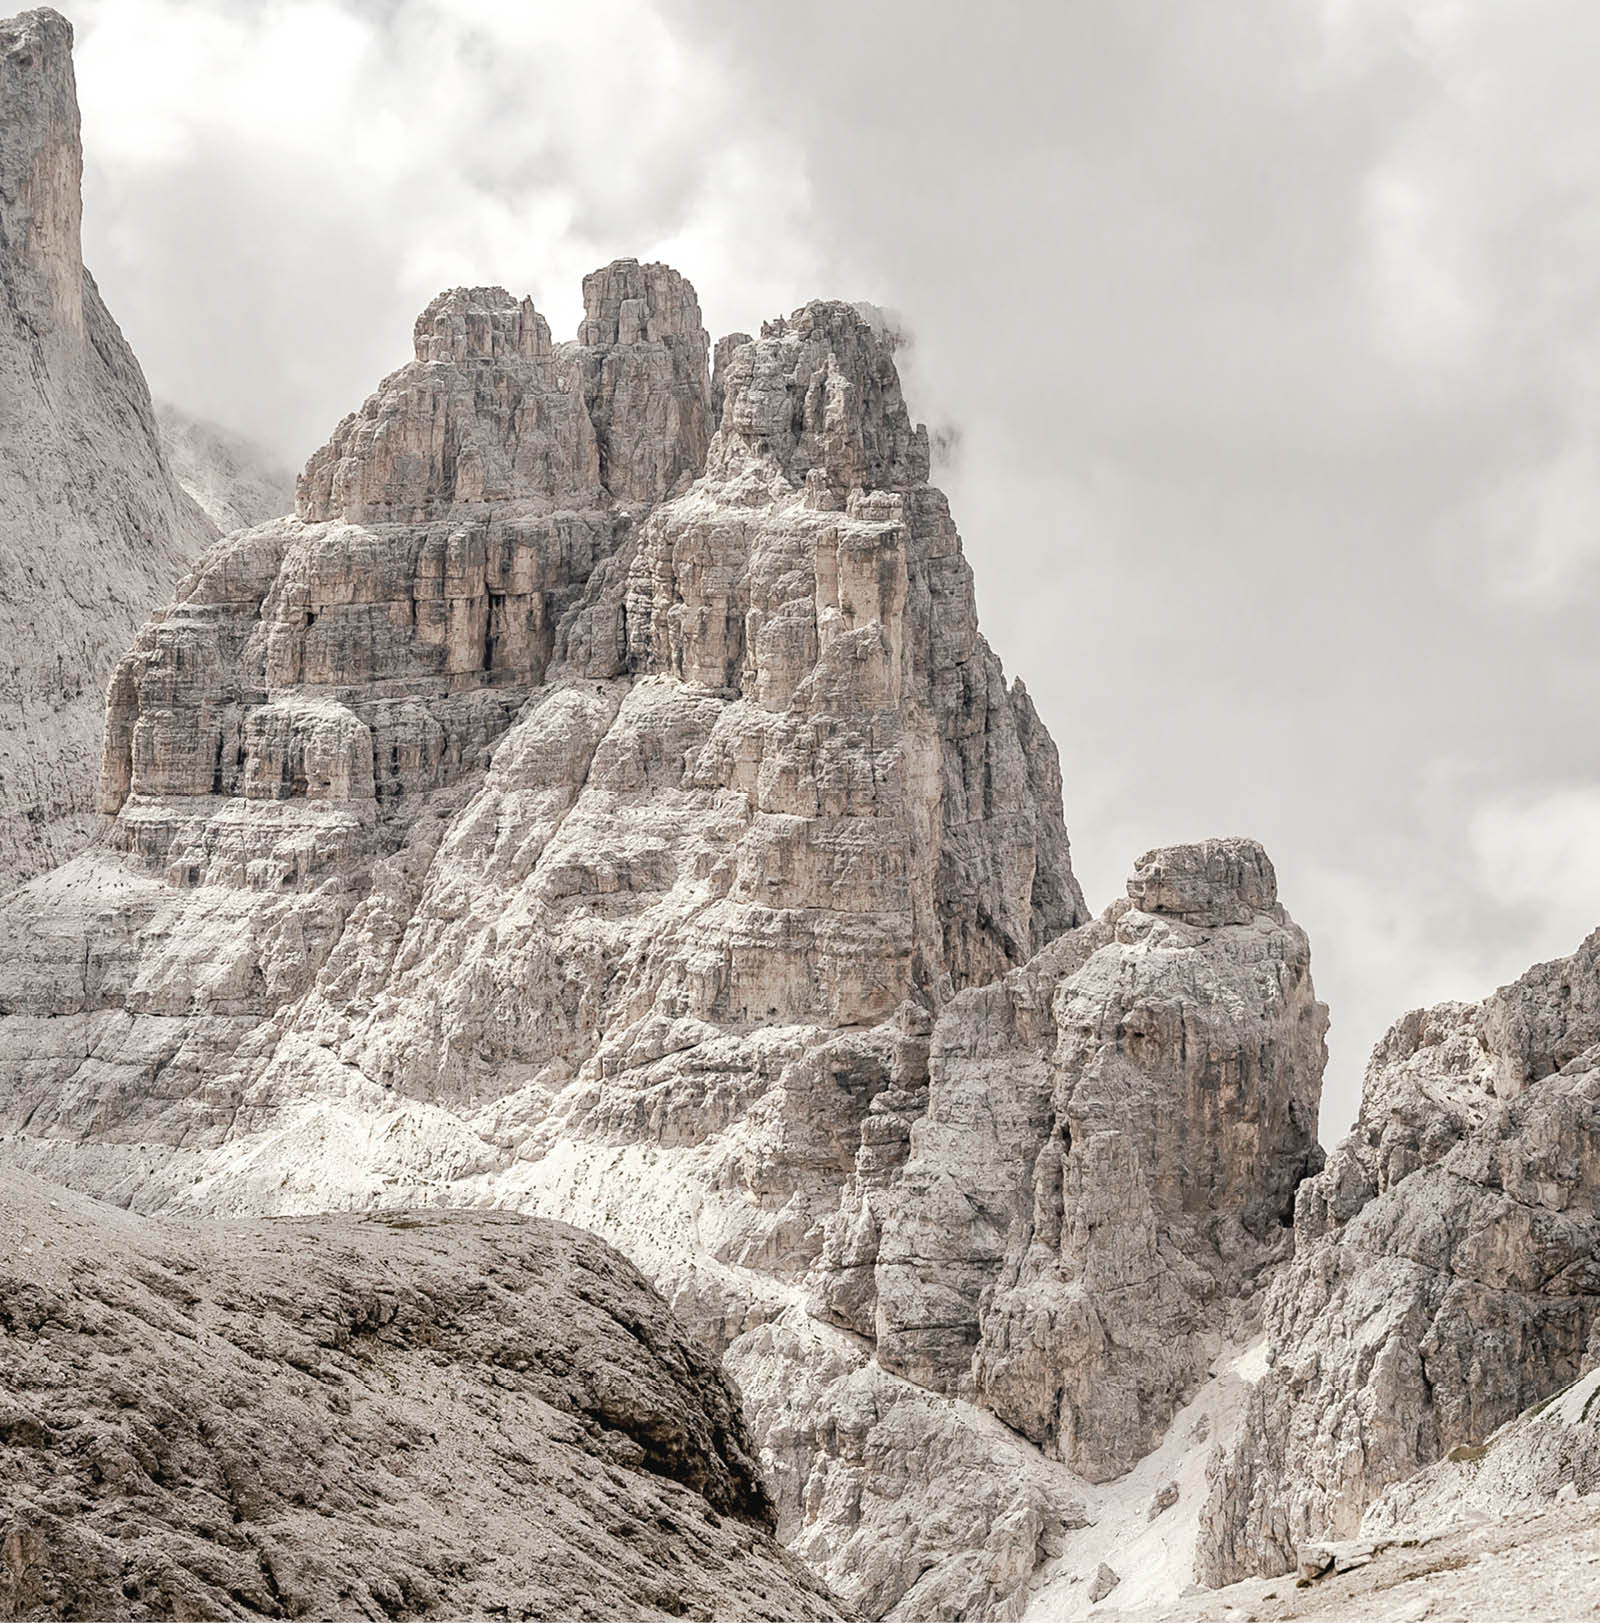 Torri del Vajolet peaks and Catinaccio summit as seen from Antermoia pass in Catinaccio mountain group, above Vajolet valley and Principe pass, Dolomites, South Tyrol, Italy 